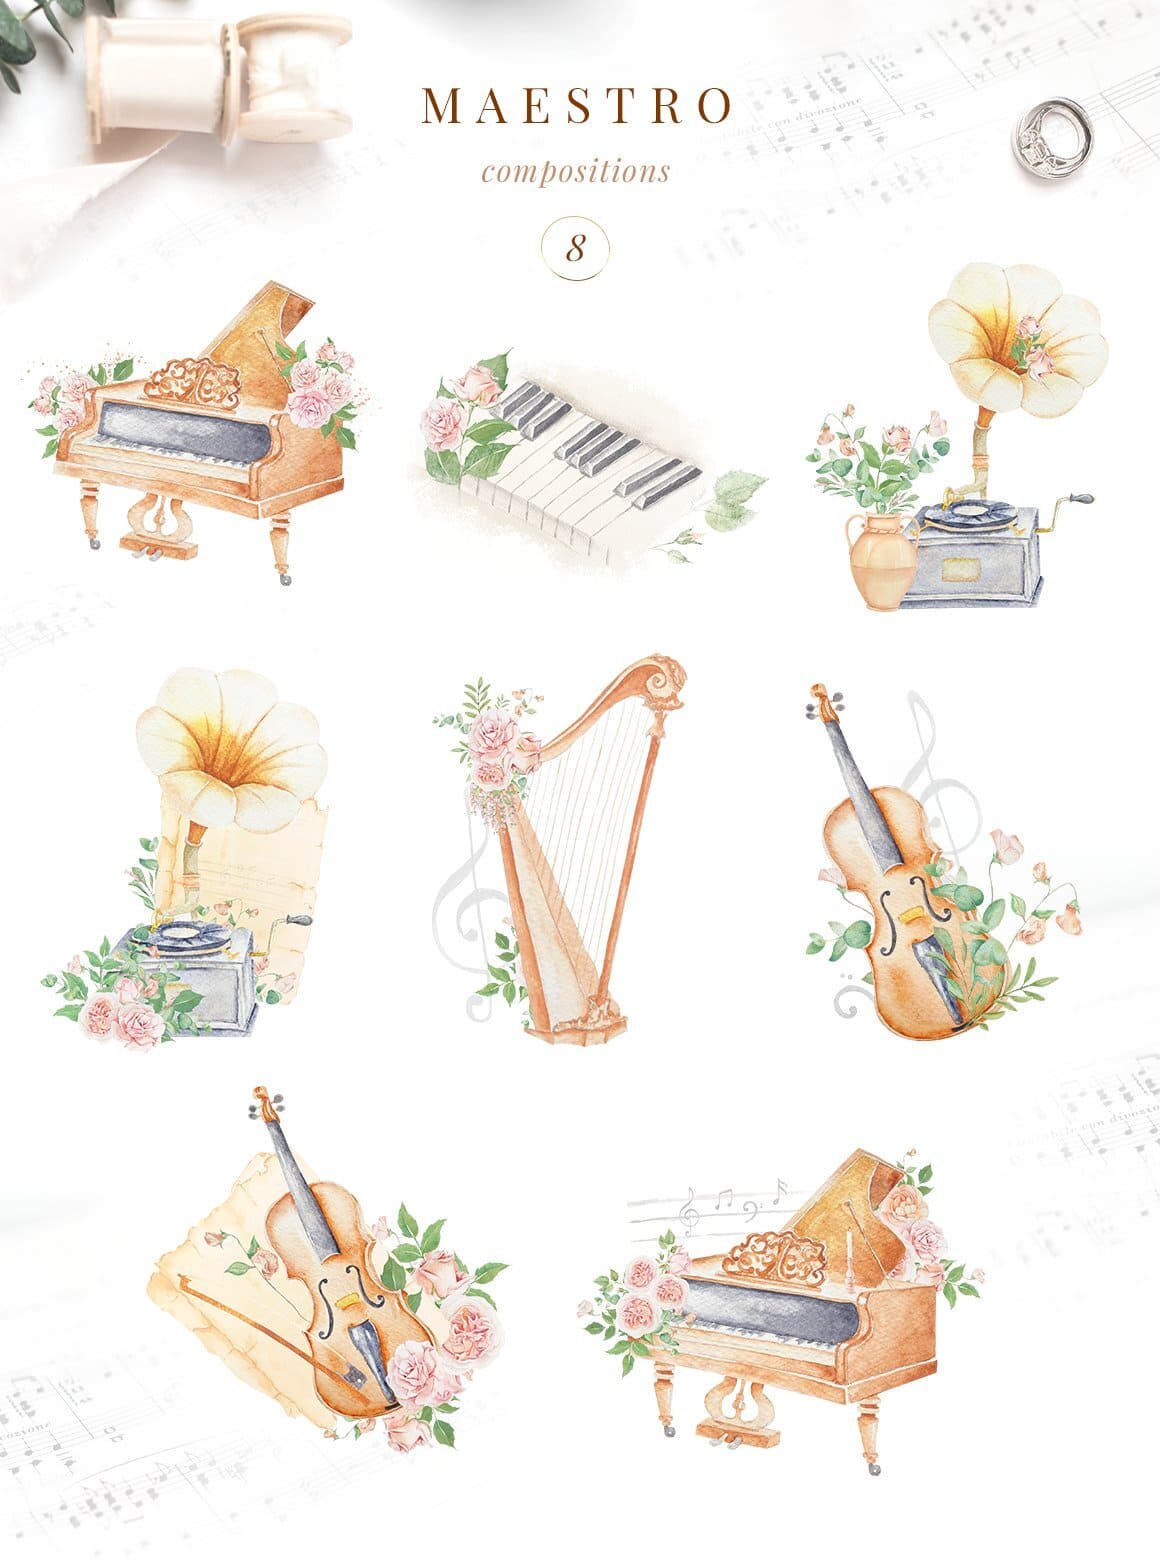 8 compositions with different musical instruments and flowers.